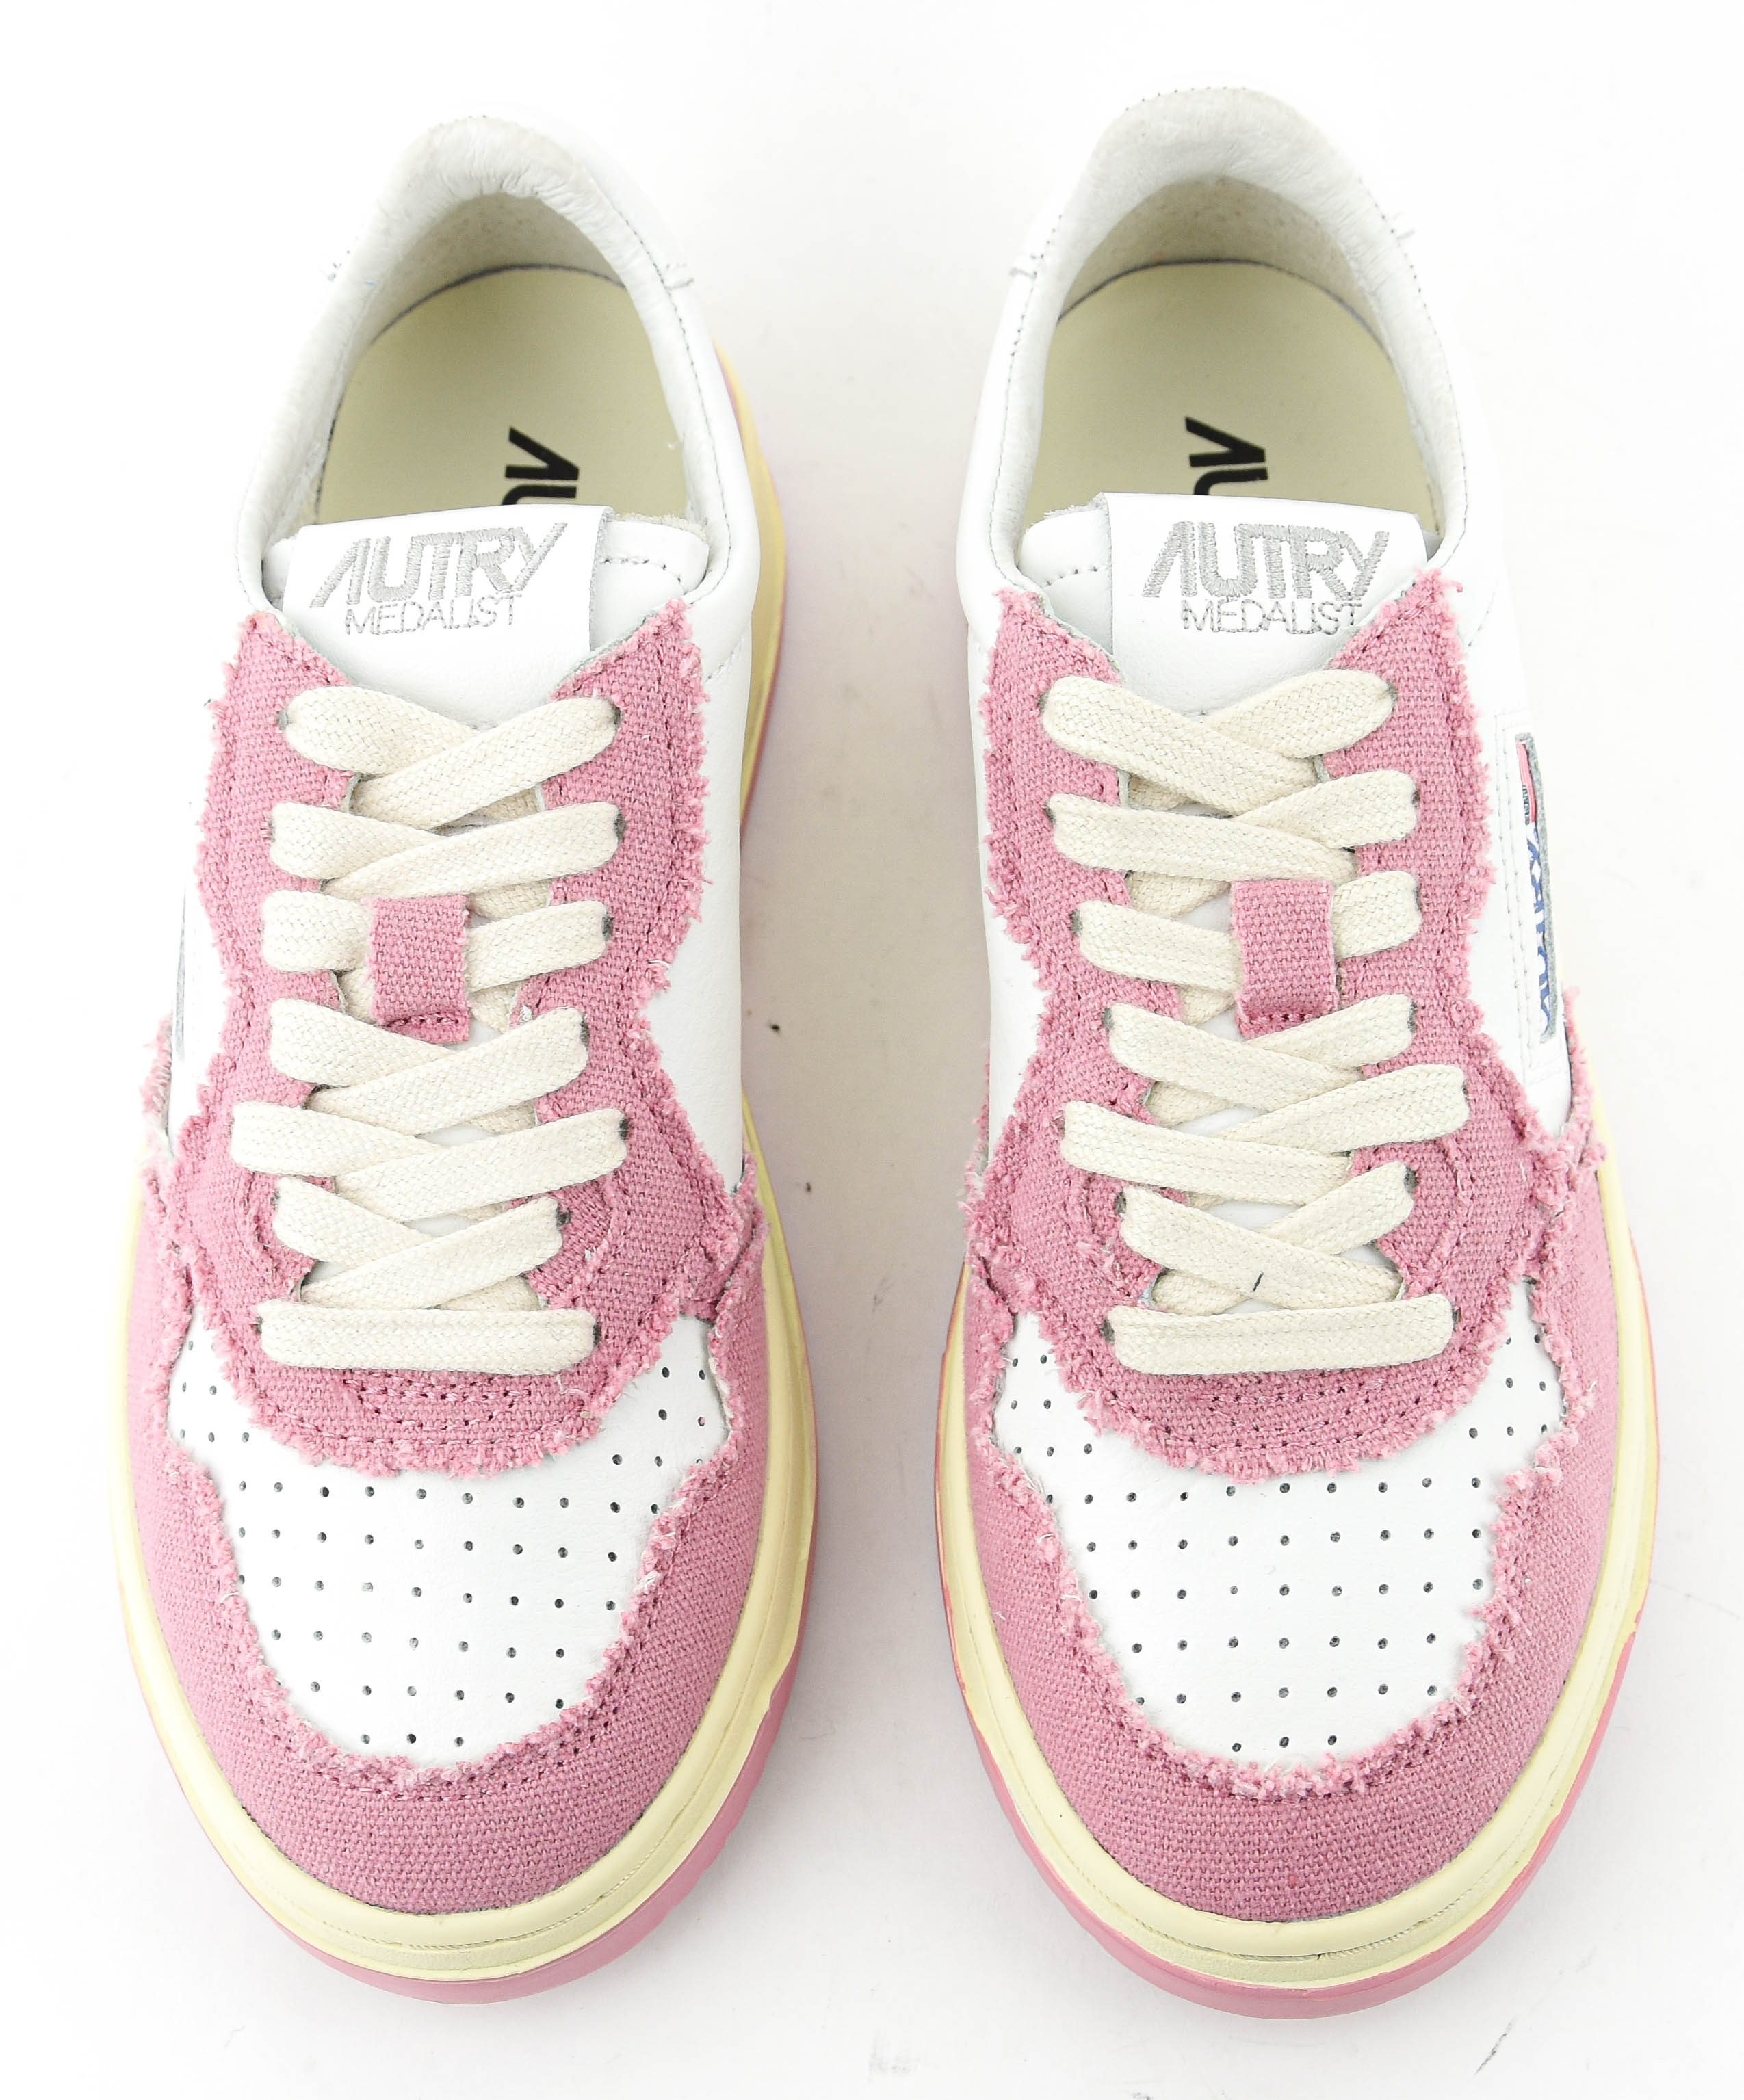 AUTRY MEDALIST LOW PINK CANVAS